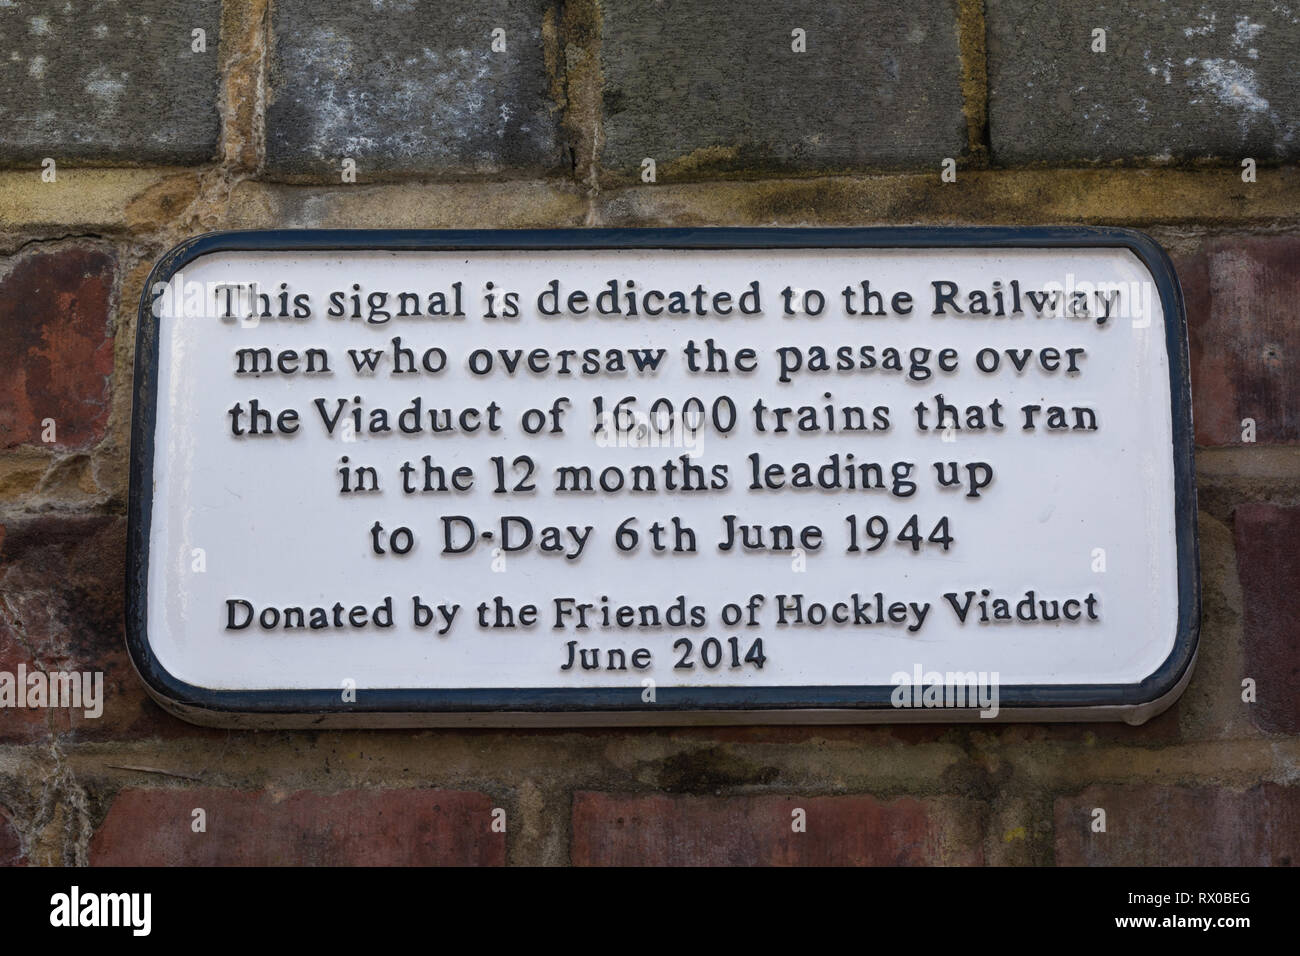 Plaque on Hockley Railway Viaduct near signal dedicated to railway men who oversaw passage of trains leading up to D-Day Stock Photo